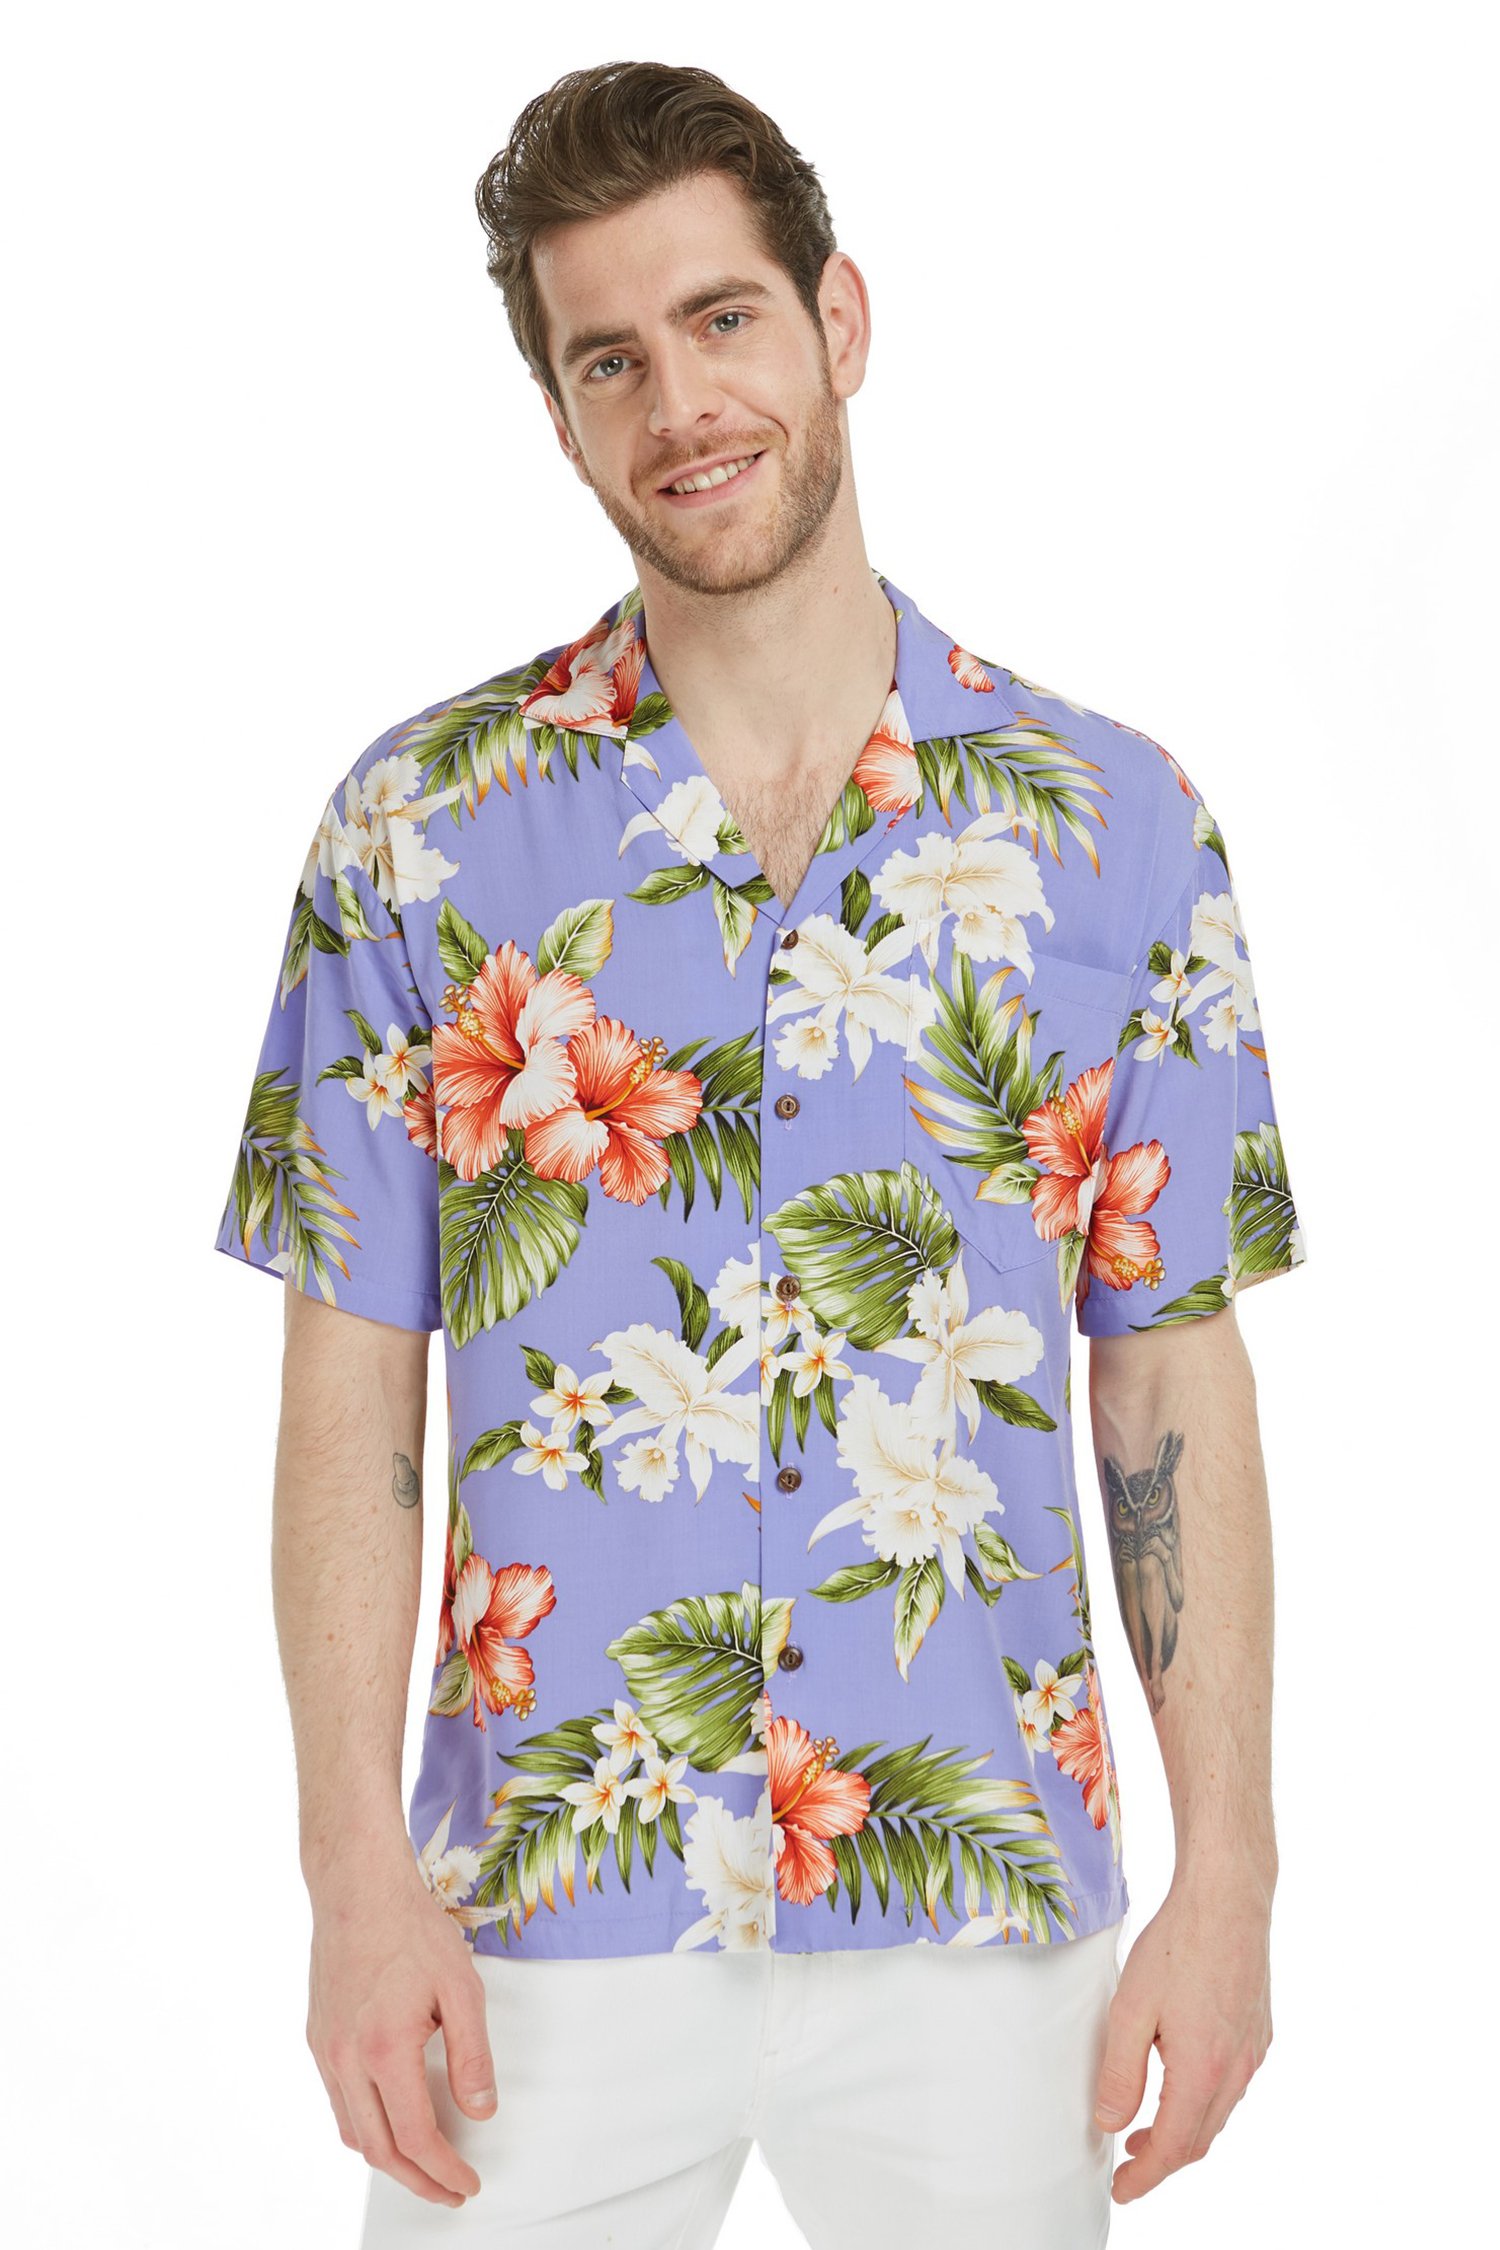 Men's Aloha Shirt Orchids and Hibiscus in Purple - Pinotee Store